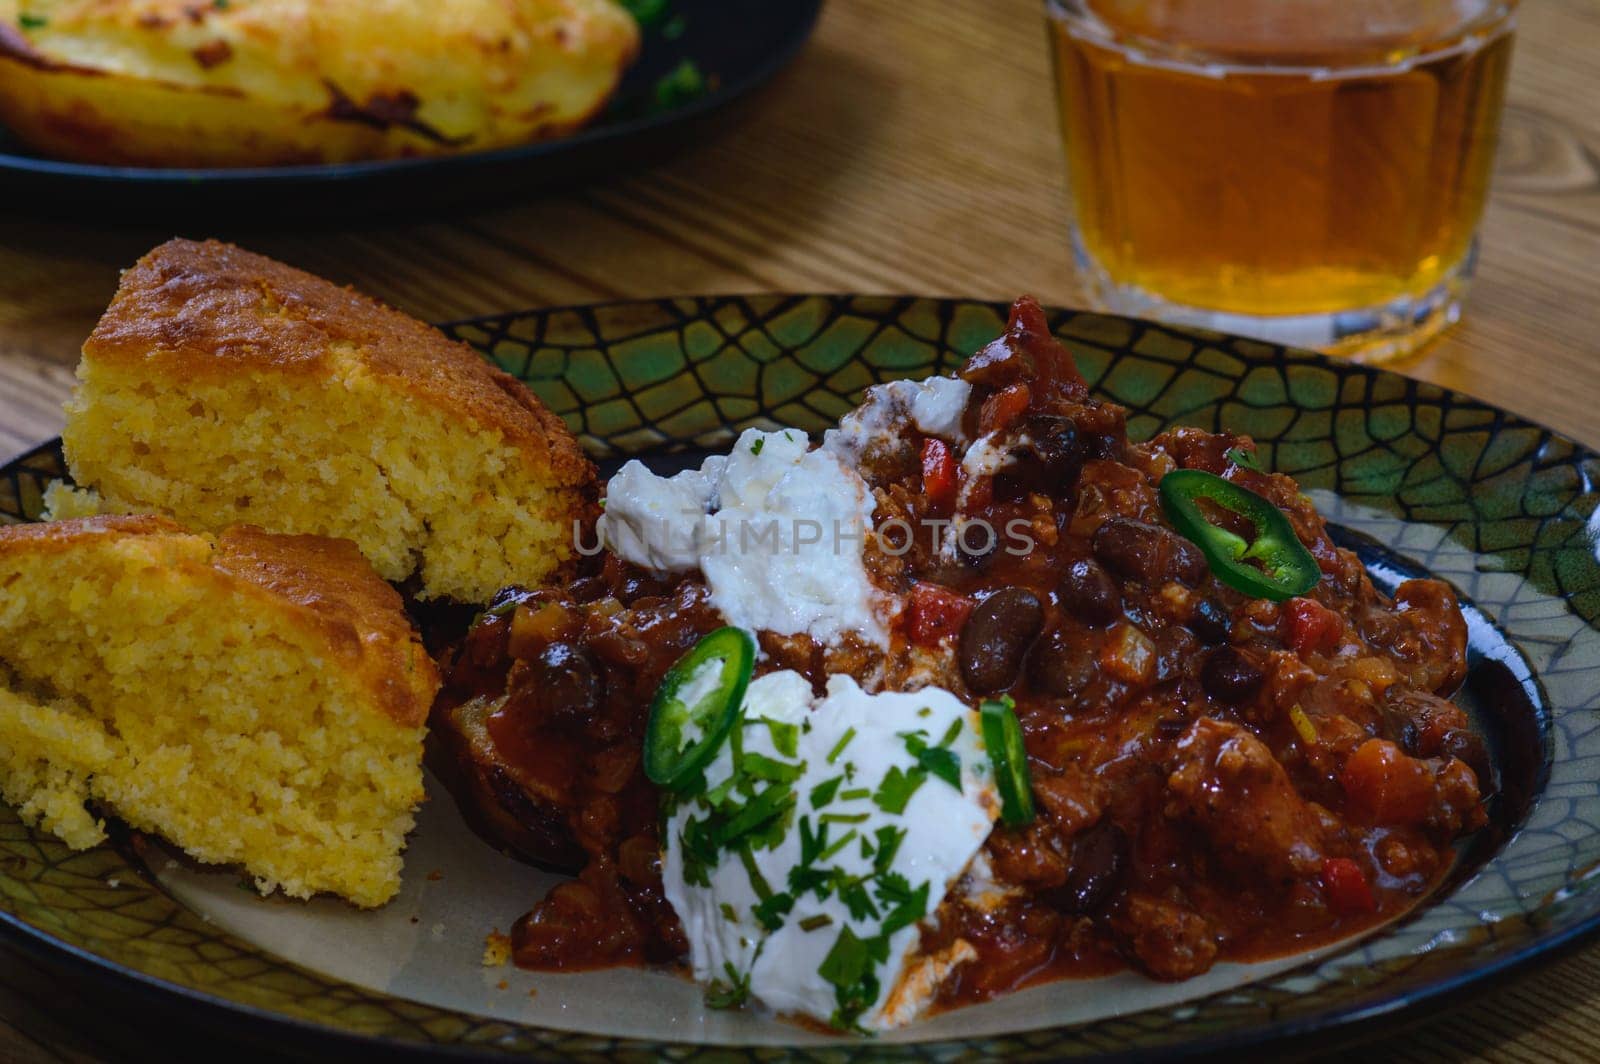 Black bean chili con carne in bowl with corn bread, potatoes. and beer. Tex-Mex style beef chili with sour cream, cilantro and jalapenos.